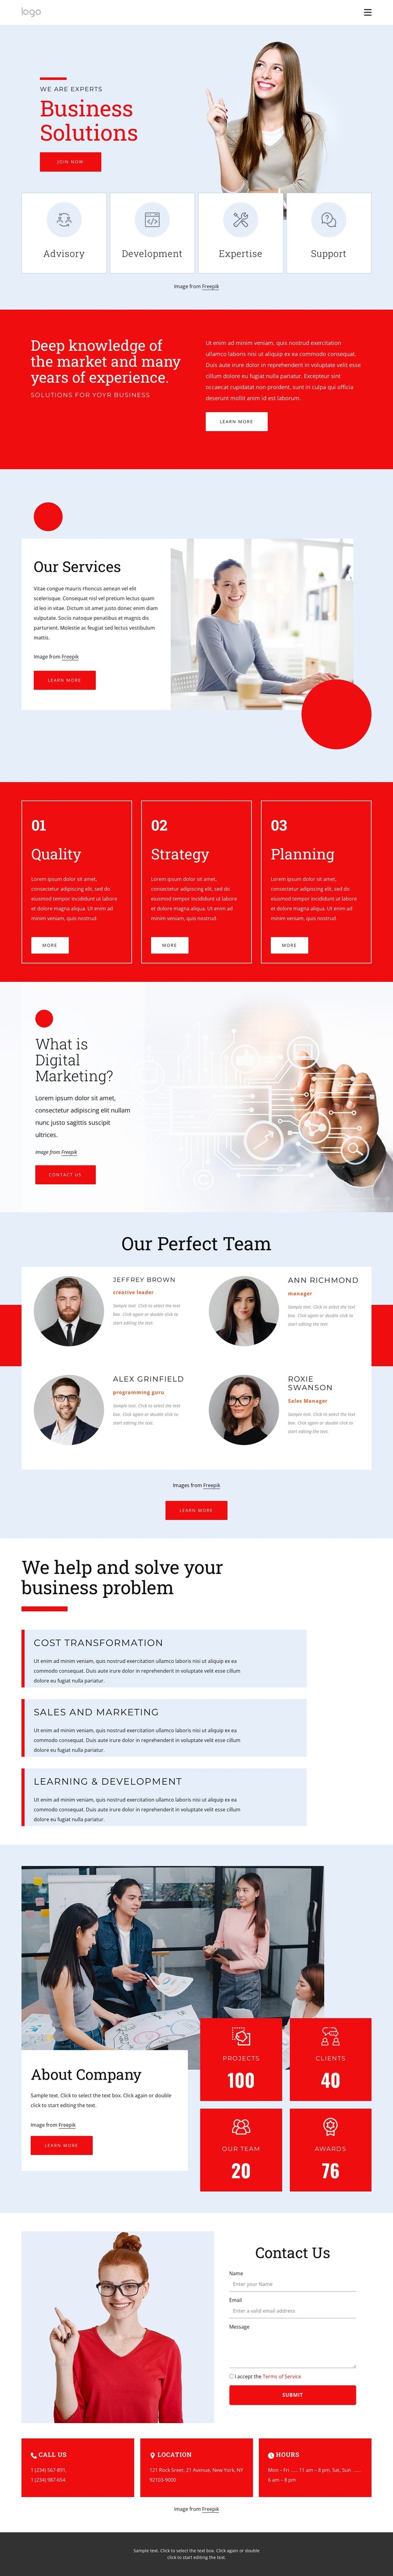 We are experts in business solutions HTML5 Template